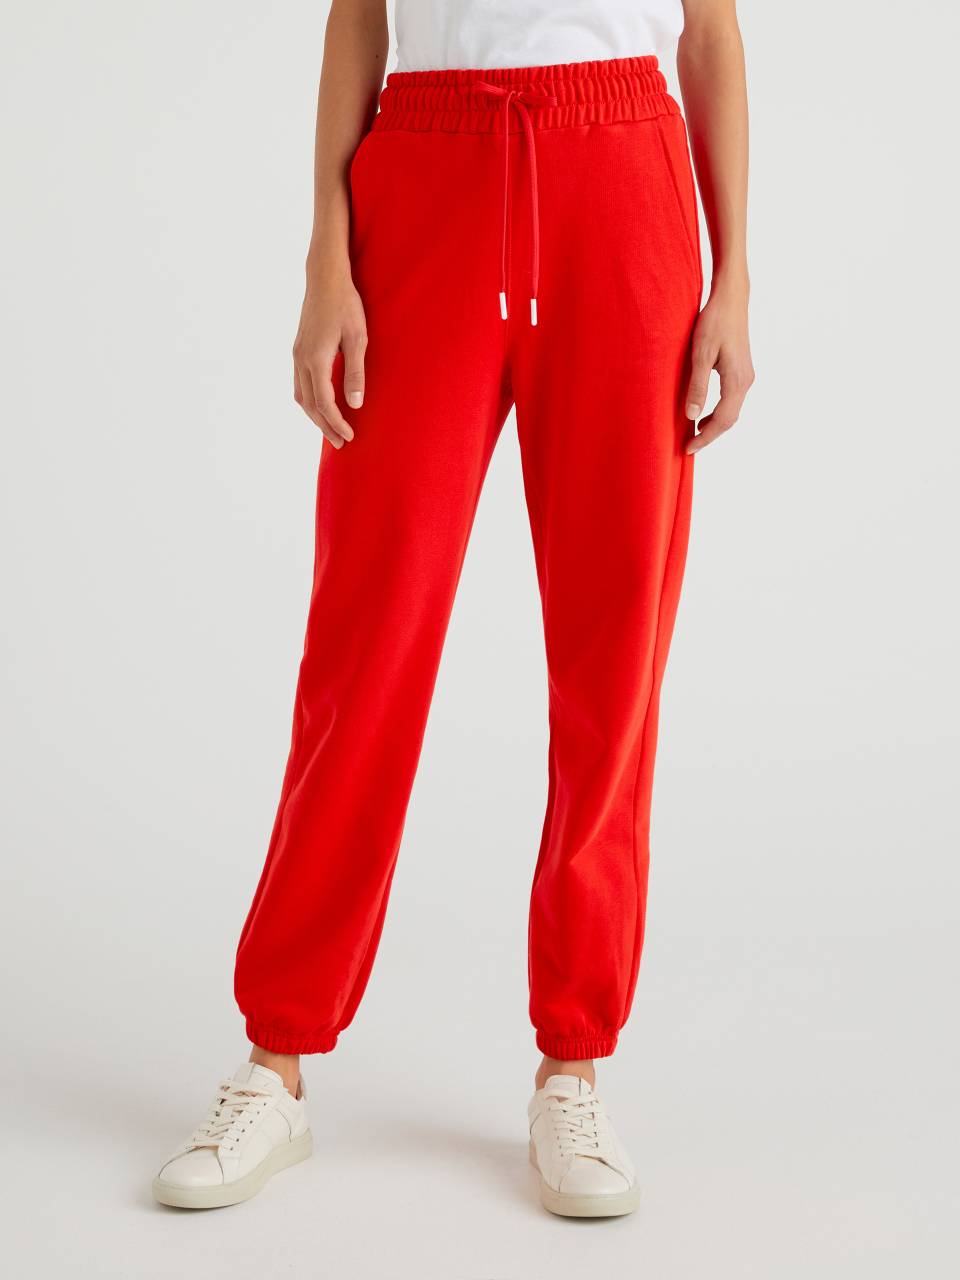 BenettonxPantone™ red joggers - Red